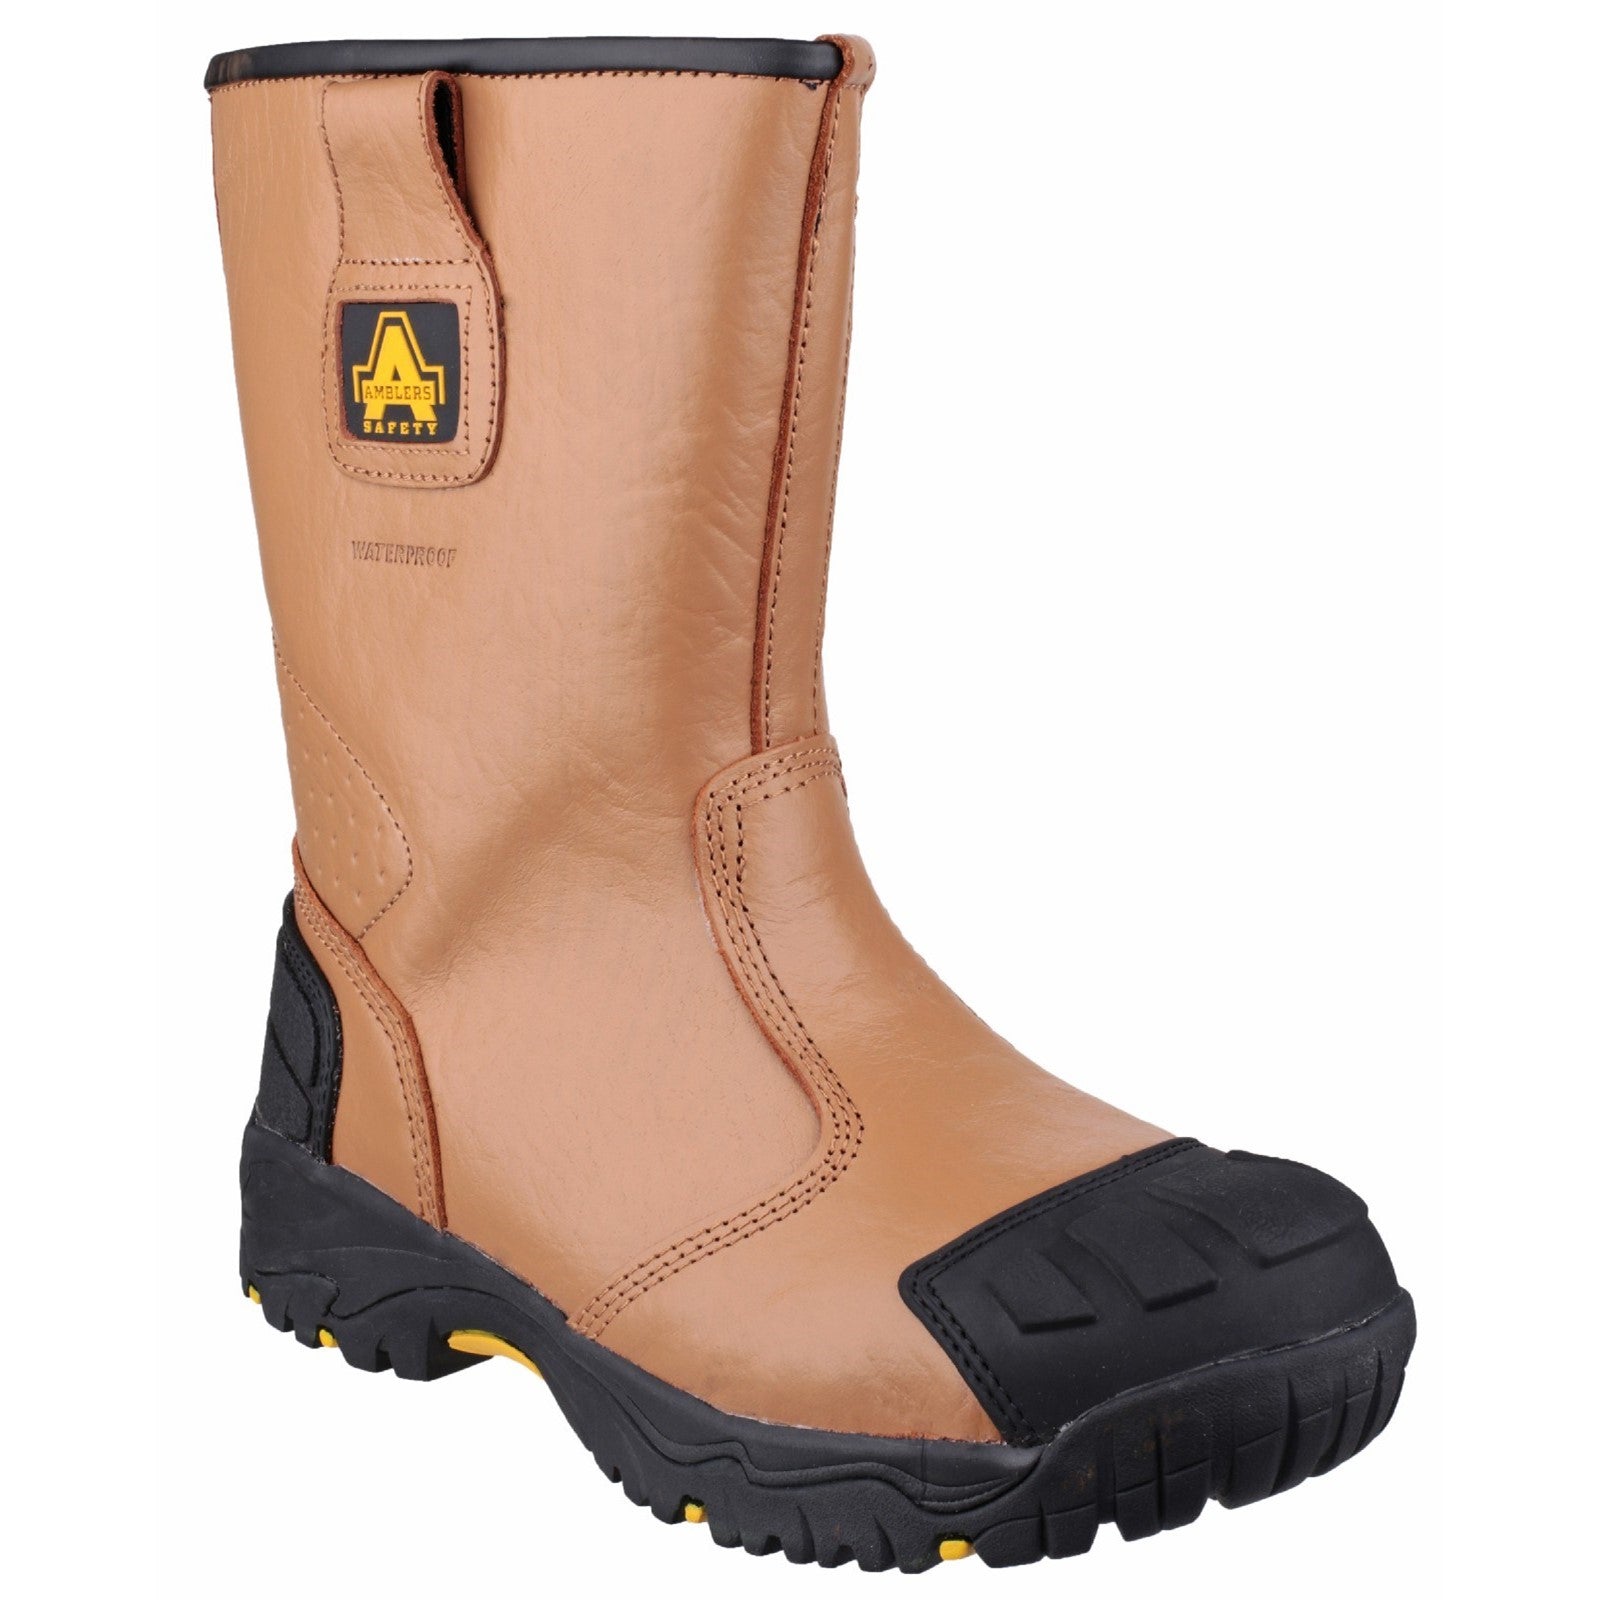 Amblers FS143 Waterproof pull on Safety Rigger Boot